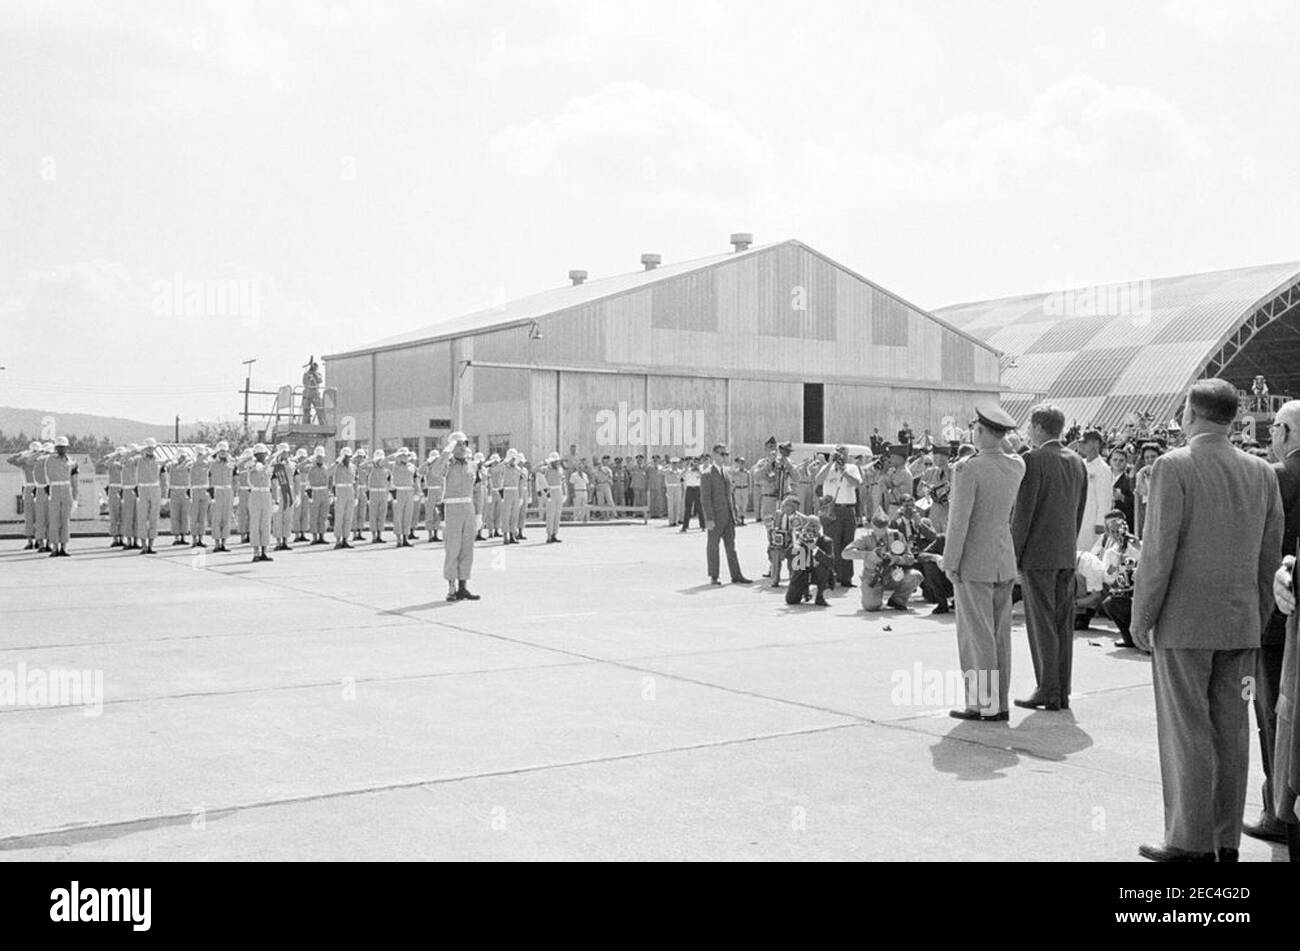 Inspection tour of NASA installations: Huntsville Alabama, Redstone Army Airfield and George C. Marshall Space Flight Center, 9:35AM. President John F. Kennedy (right, back to camera) receives military honors upon arrival at Redstone Army Airfield, Redstone Arsenal, Huntsville, Alabama; Commanding General of the U.S. Army Missile Command, Major General Francis J. McMorrow (saluting), stands left of President Kennedy. Standing at far right in foreground: Administrator of the National Aeronautics and Space Administration (NASA), Dr. James E. Webb; Senator Alexander Wiley of Wisconsin (mostly out Stock Photo